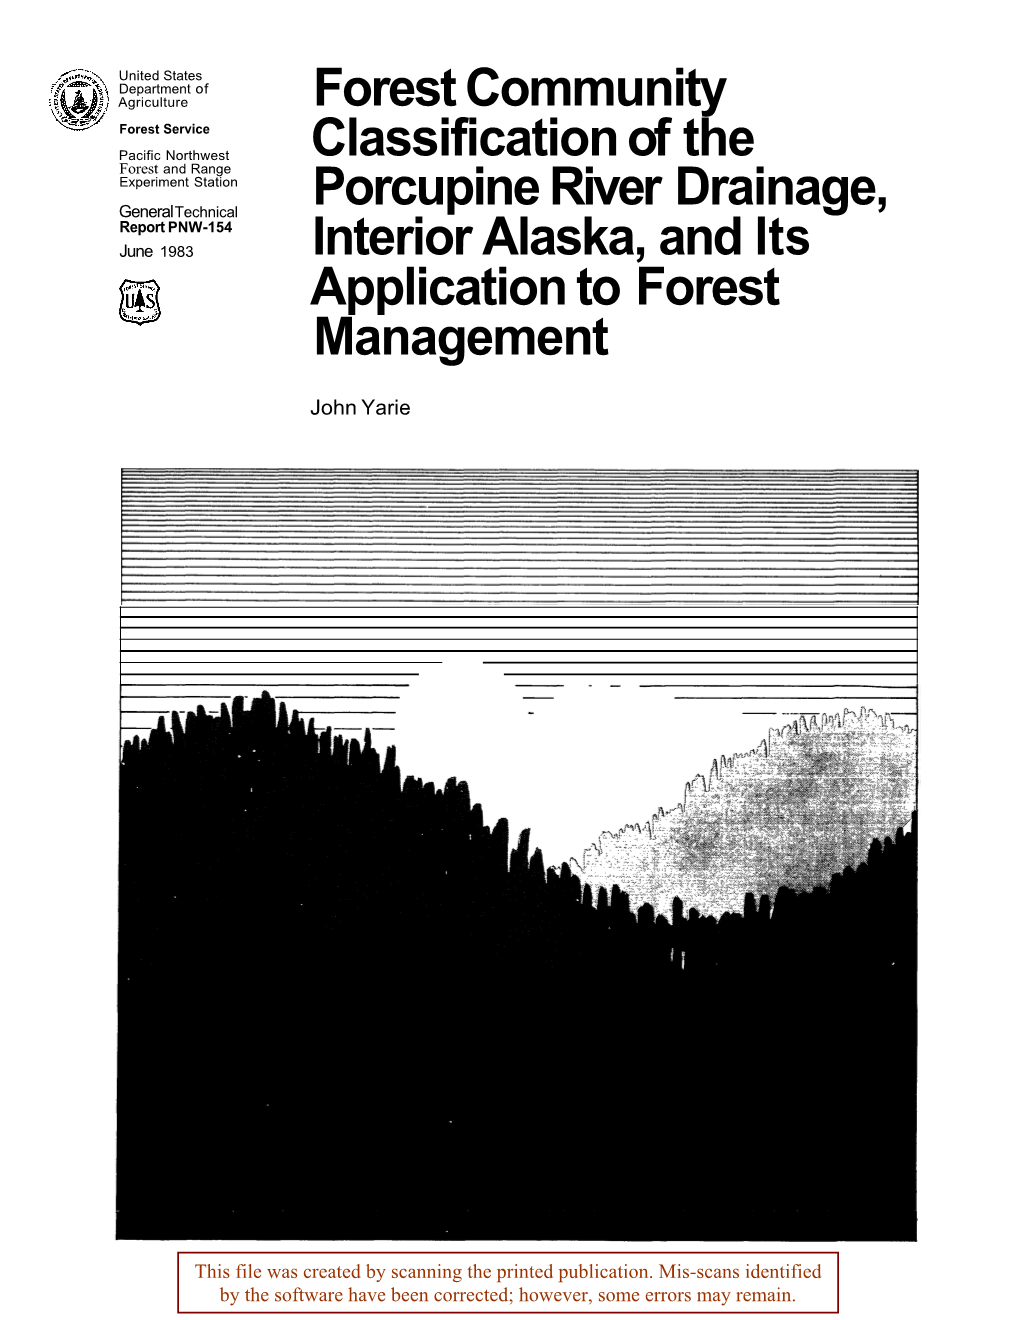 Forest Community Classification of the Porcupine River Drainage, Interior Alaska, and Its Application to Forest Management